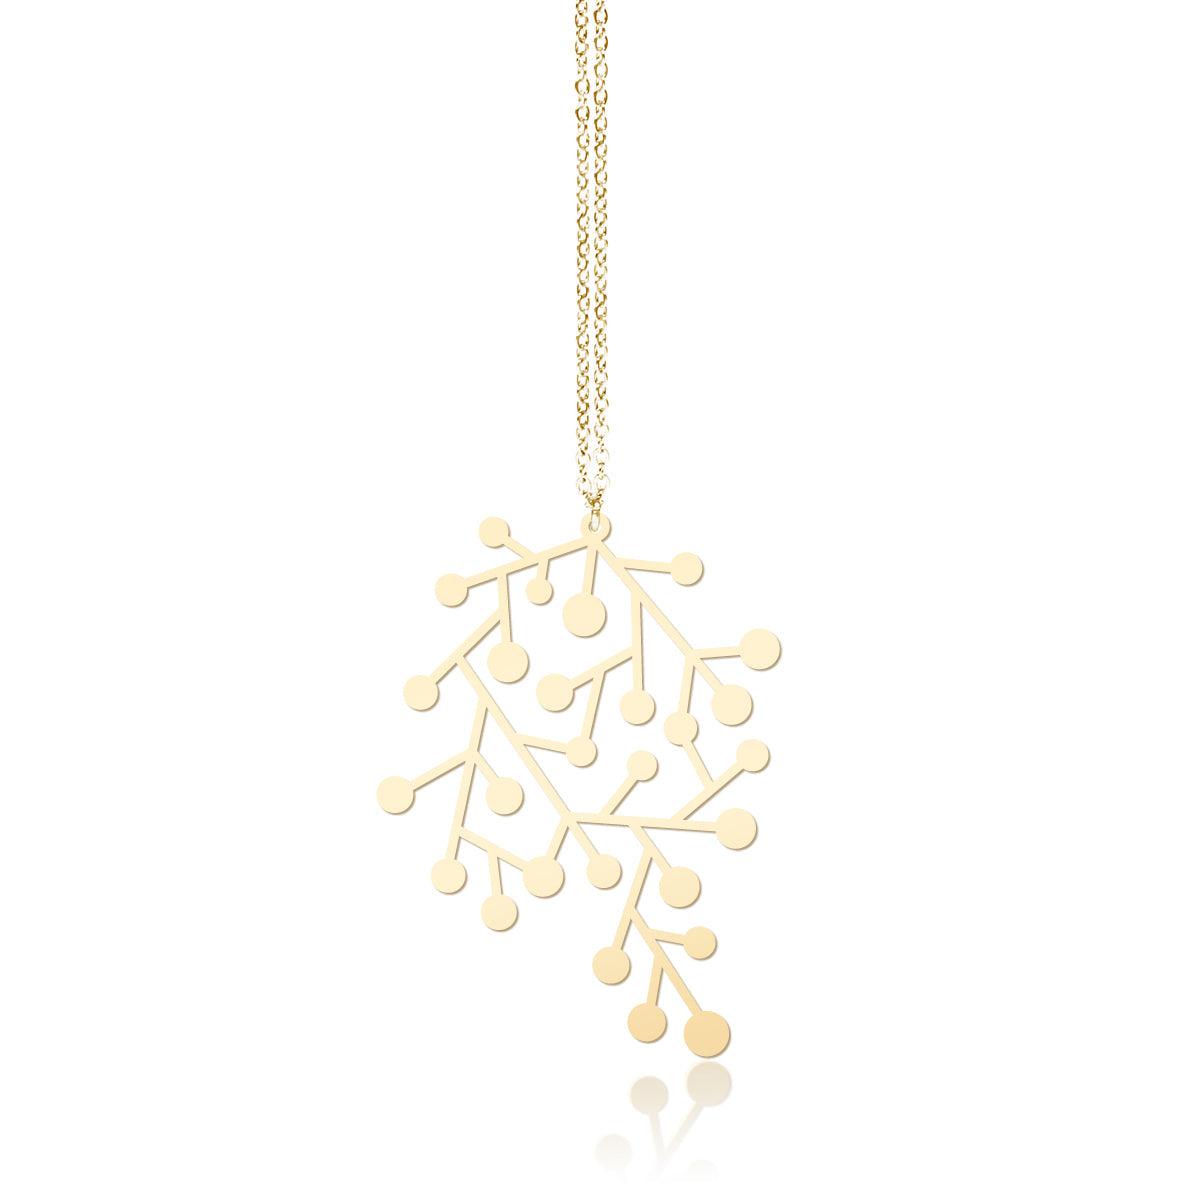 SNOWDAYS PENDANT SMALL GOLD WITH CHAIN